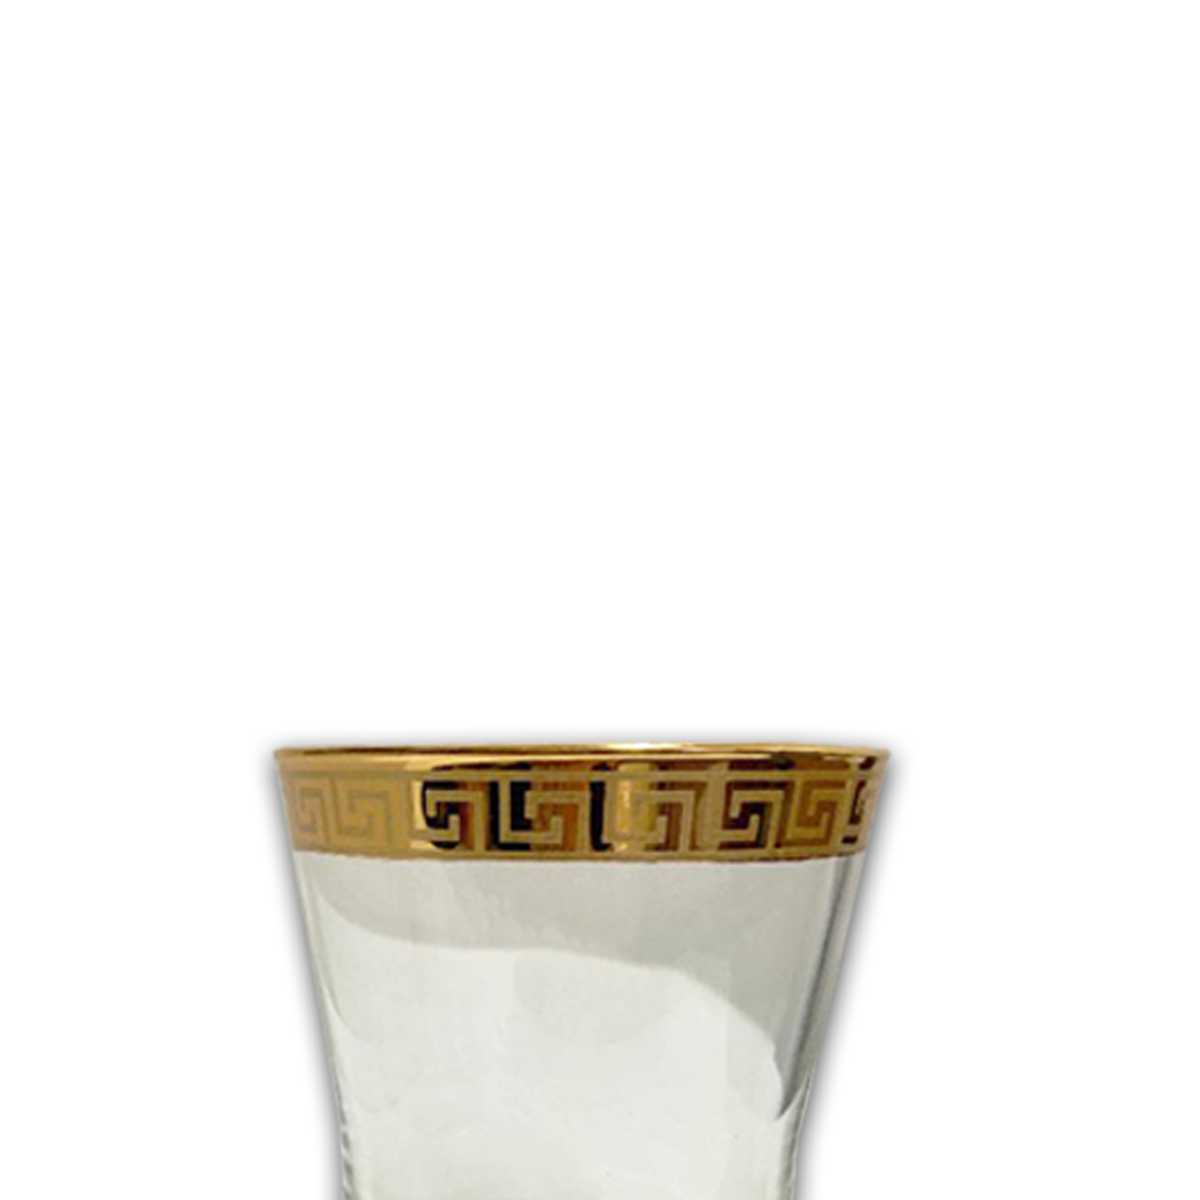 6 PC Short Gold Versace Inspired Design Glass Cups